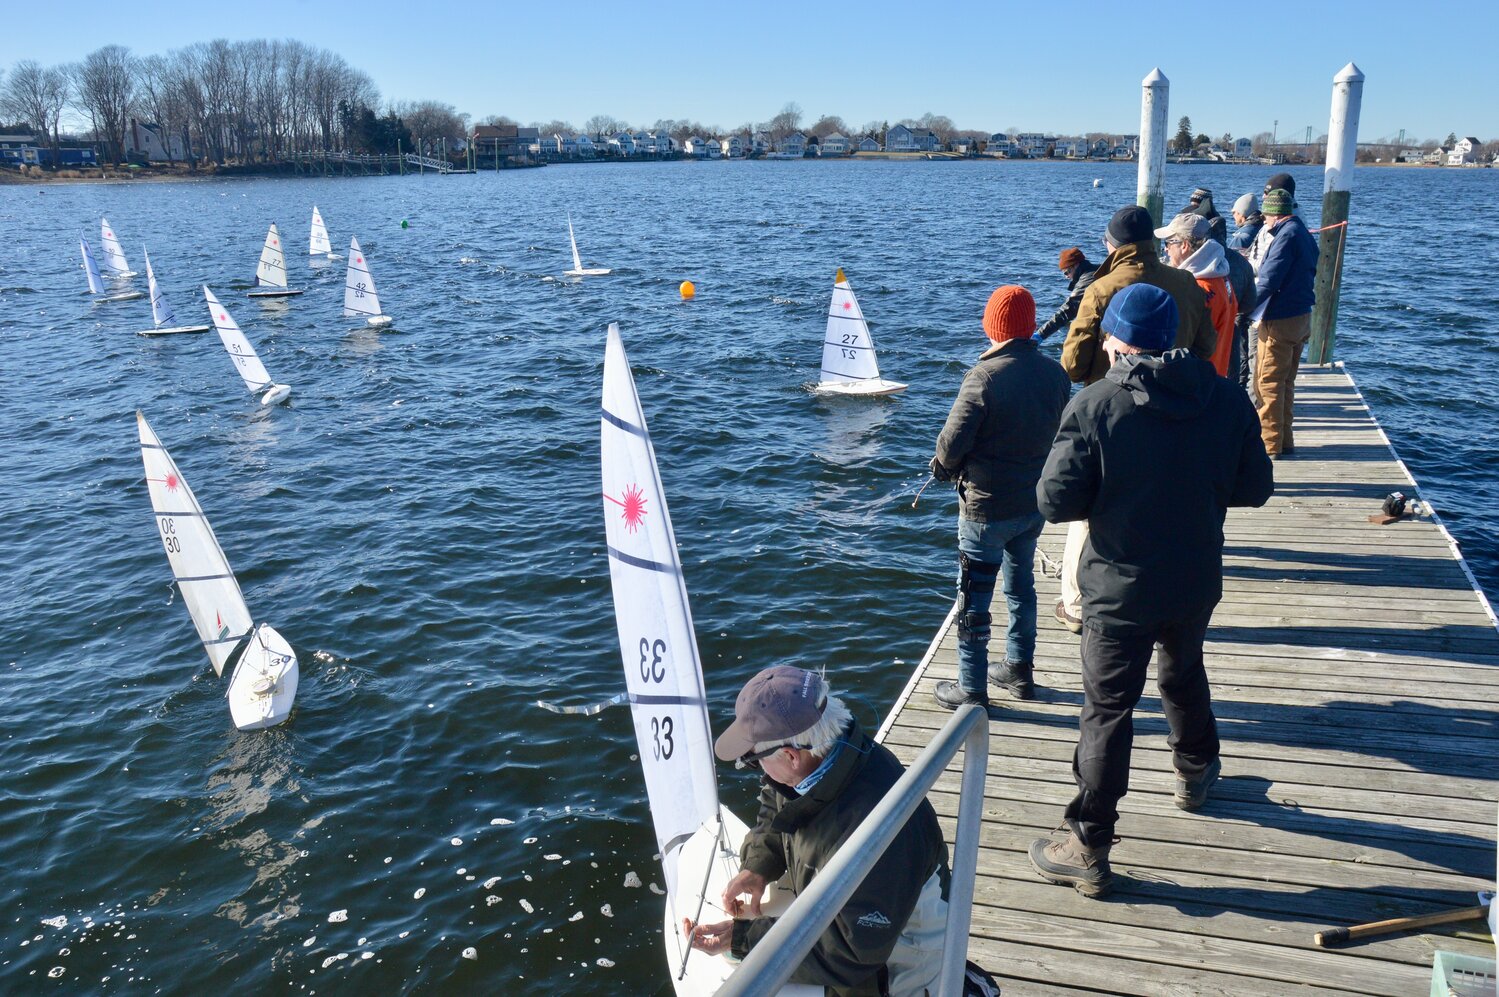 A crowded field of racers jockey for position as they wait for the start of one race in Blue Bill Cove in Portsmouth on Sunday.